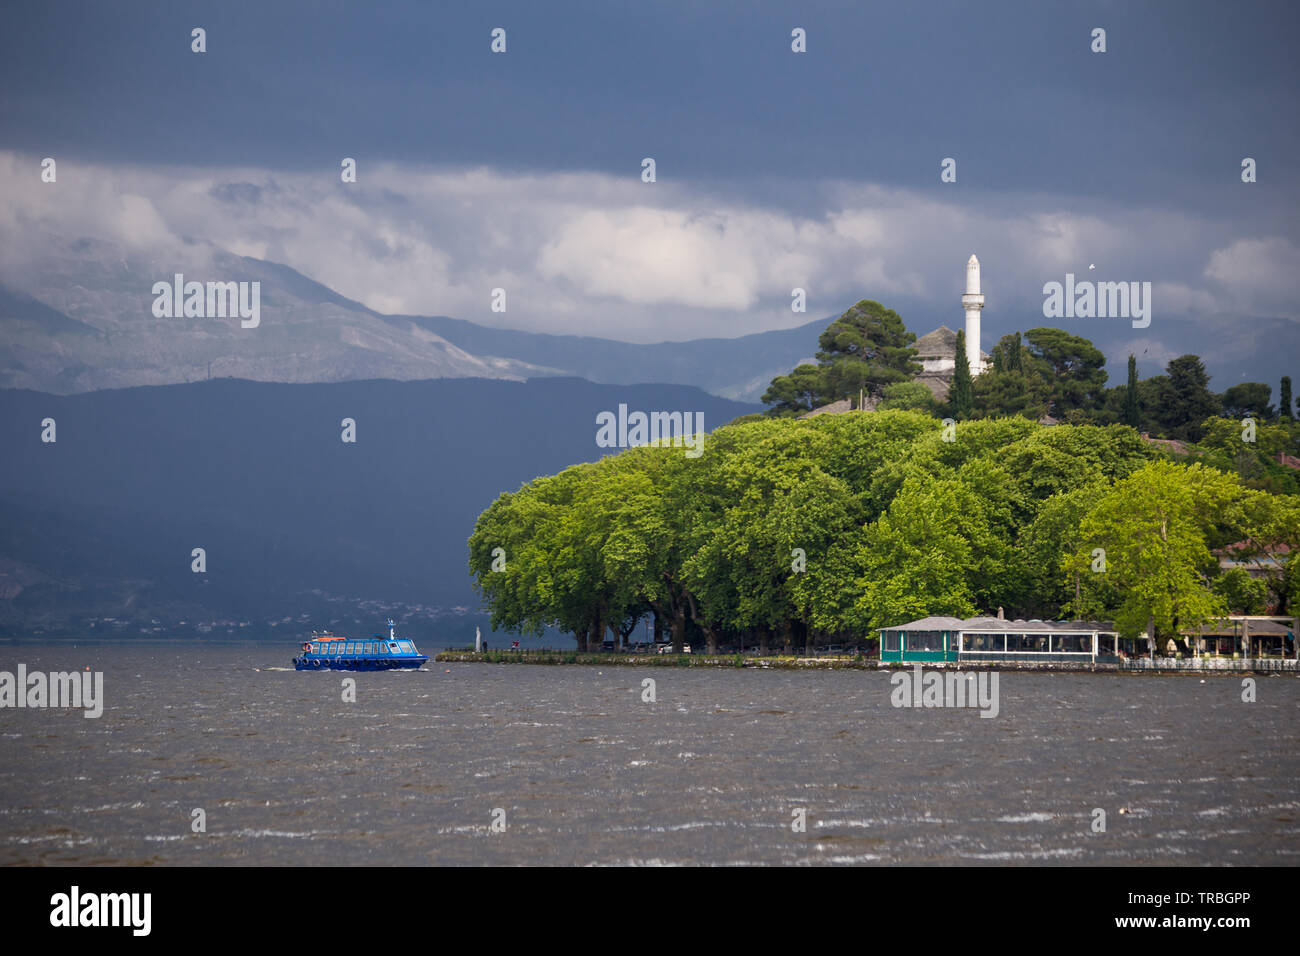 Ioannina city dock and lake Pamvotis in spring rainy day in greece Stock Photo